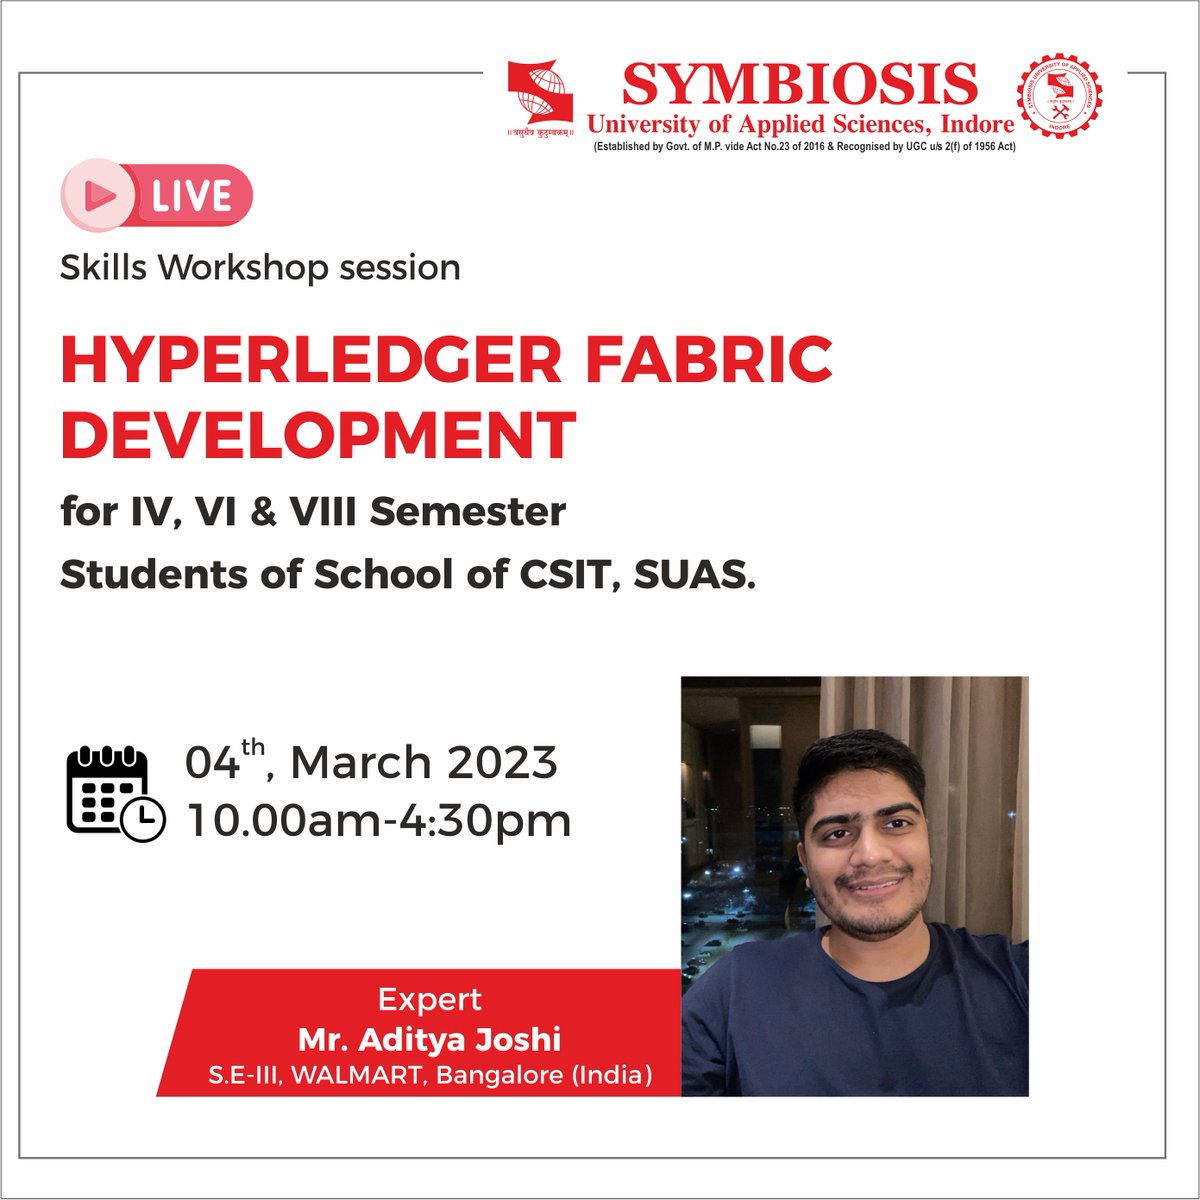 The School of Computer Science and Information Technology 
Organizes 
Session on 'HYPERLEDGER FABRIC DEVELOPMENT' 

Date - 04-MAR-2023 (Saturday)
Time – 10:00 AM to 4:30 PM.

By expert - Mr. Aditya Joshi, S.E-III, WALMART, Bangalore (India)
#Symbiosis #SUAS #Expertsession